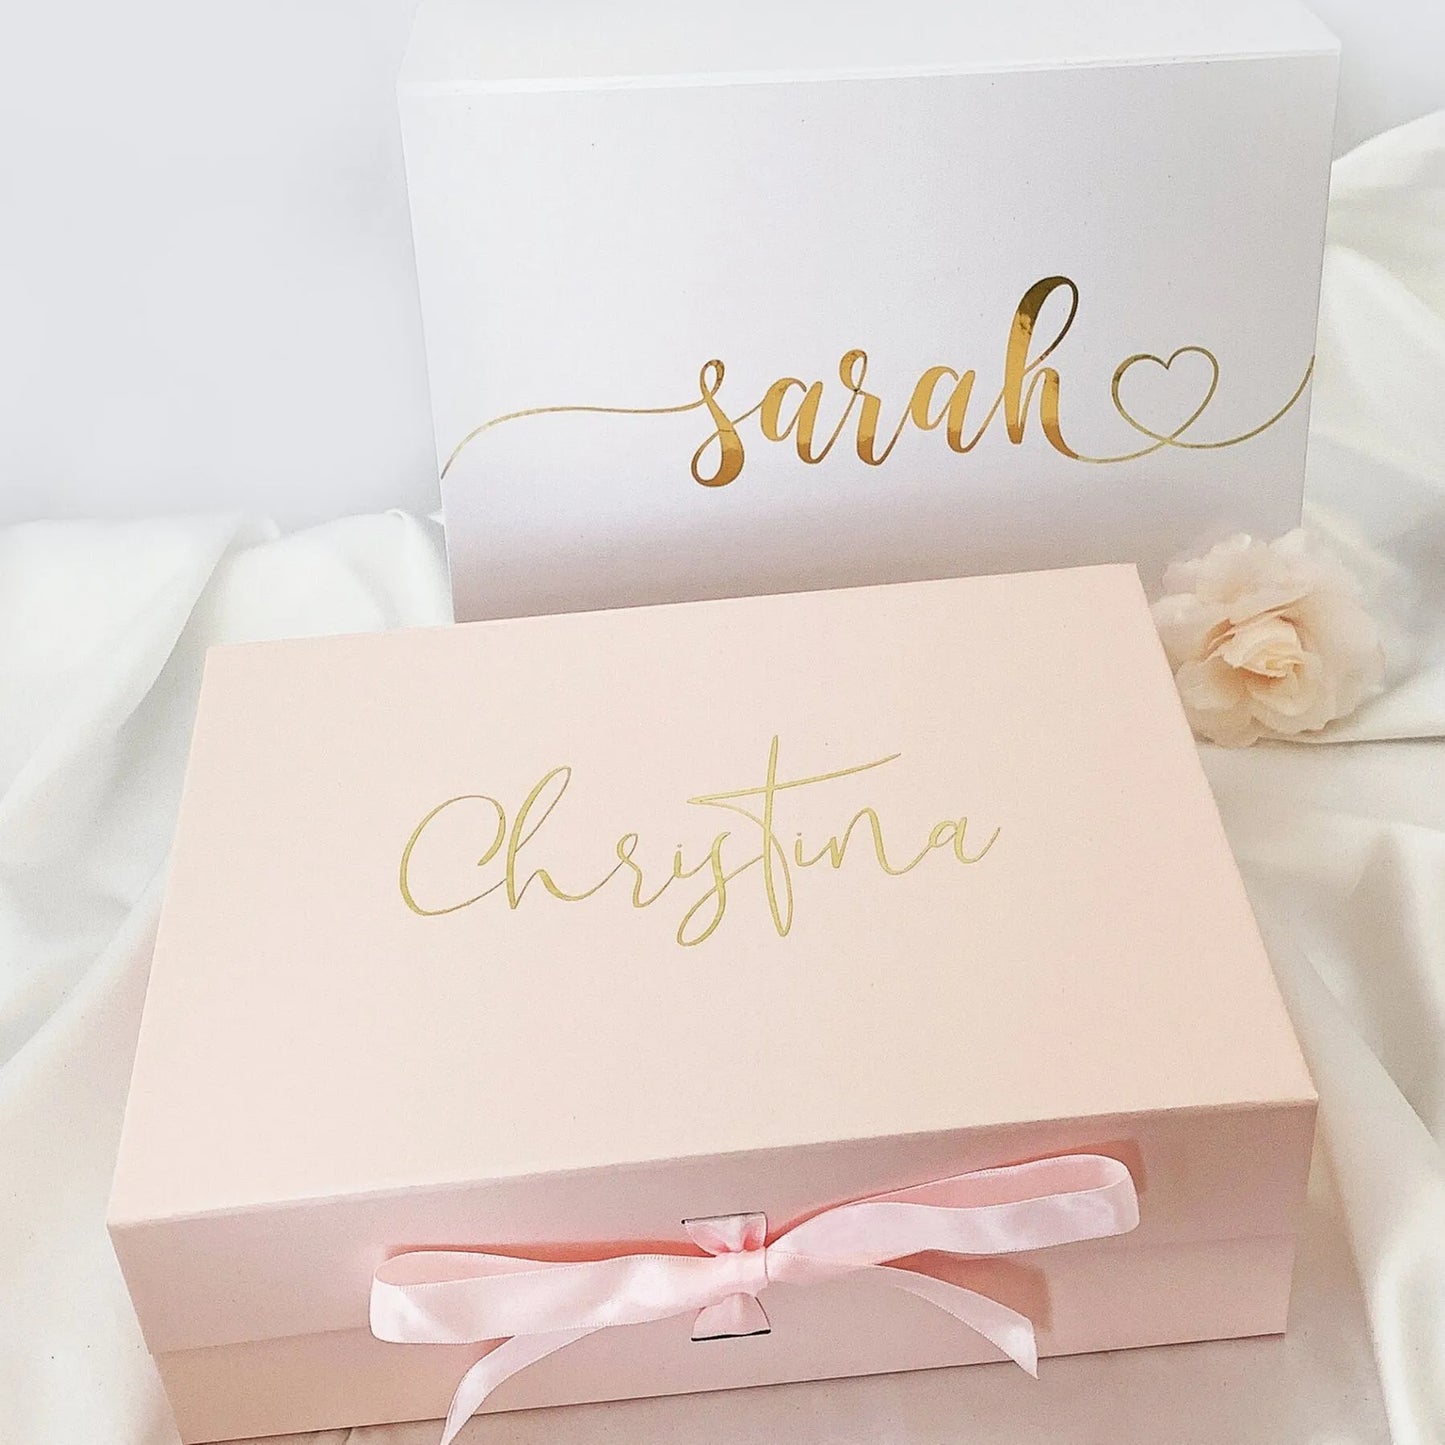 Custom Bridesmaid Gift Box - Personalized Maid of Honor, Wedding Box with Name